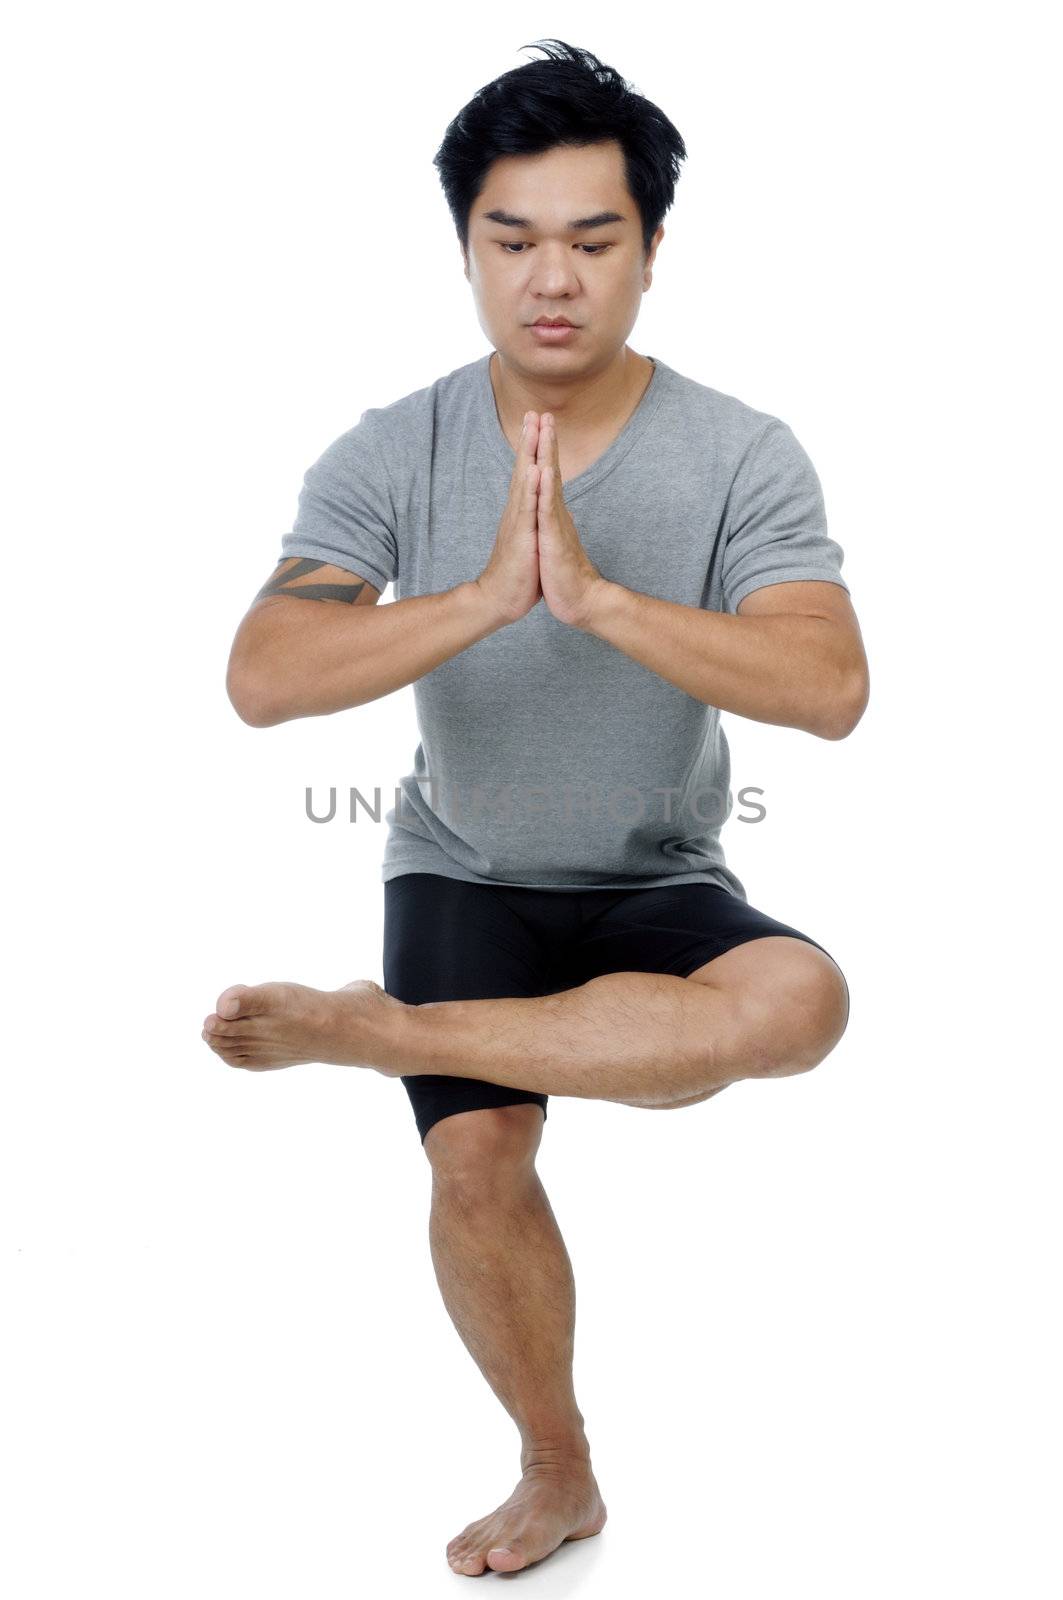 Portrait of a handsome Asian man doing yoga stance over white background.